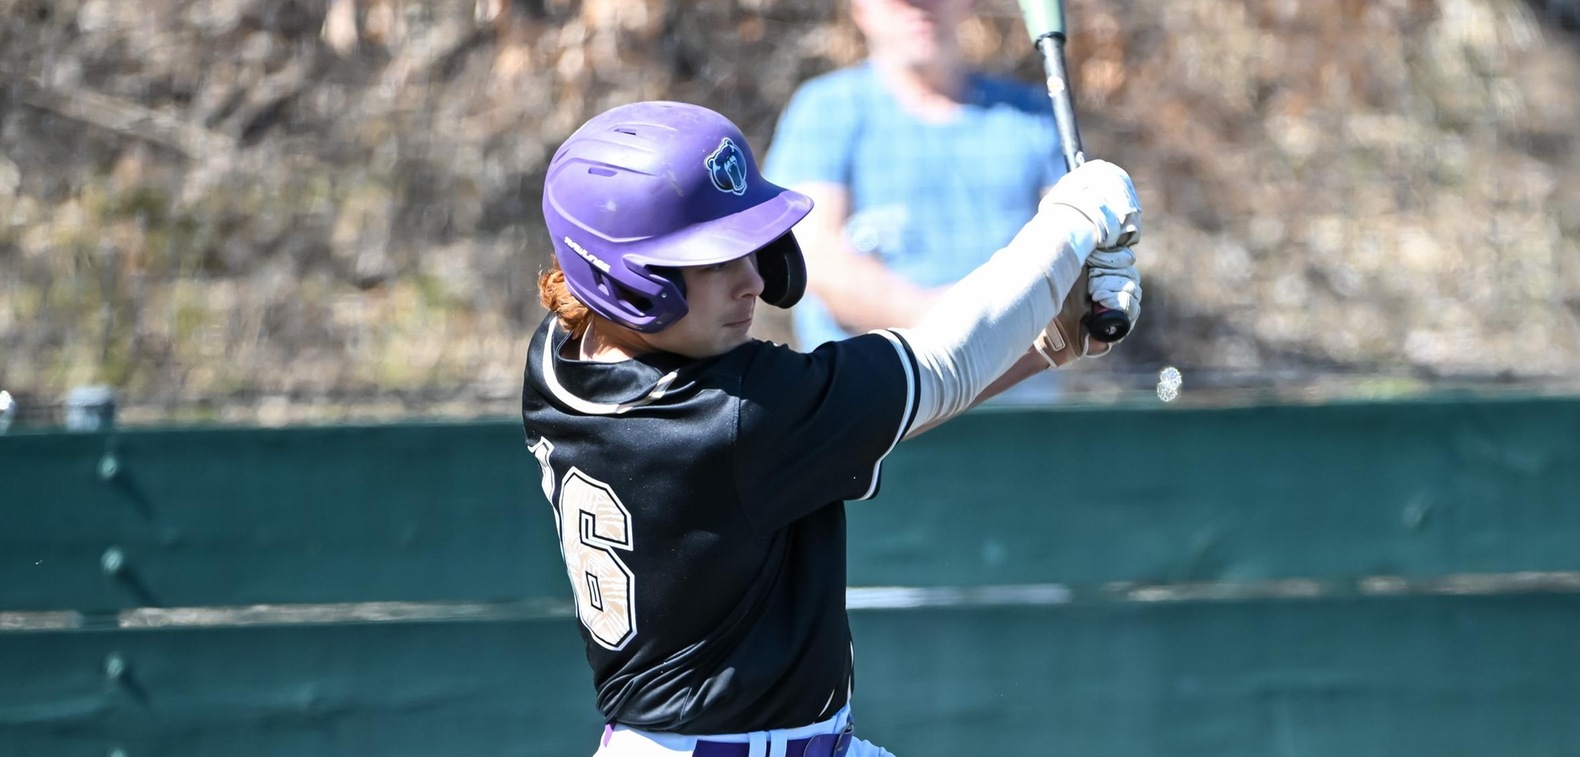 Alec Ackerman finished the double-header 4-for-9 with 5 RBI and a pair of runs scored.